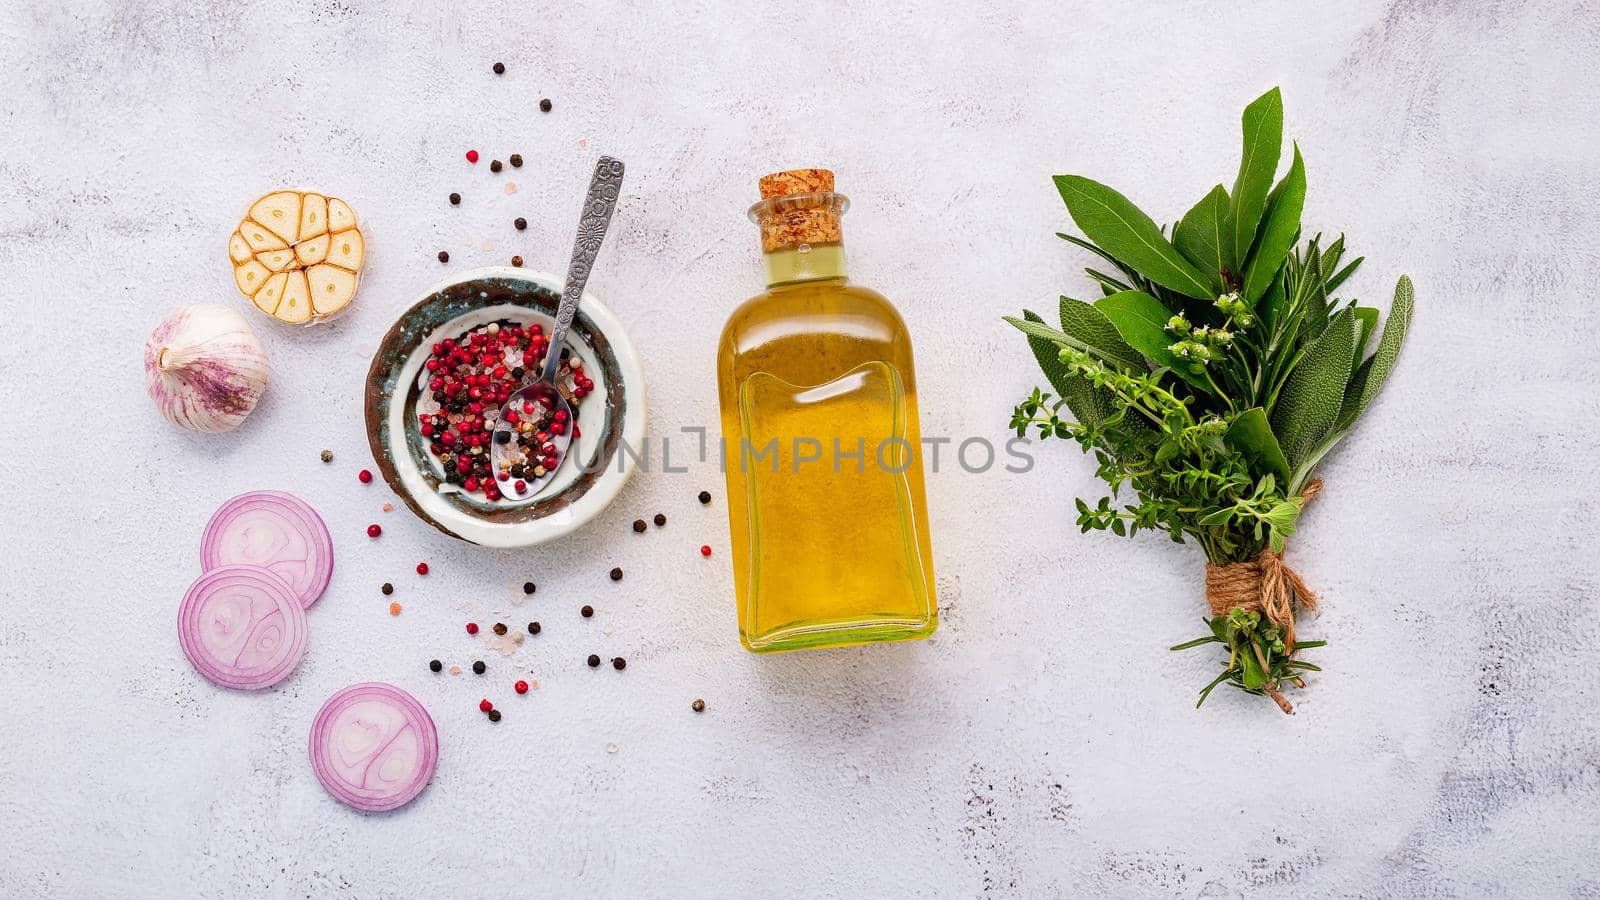 Ingredients for steak seasoning in ceramic bowl set up on white concrete background with copy space.